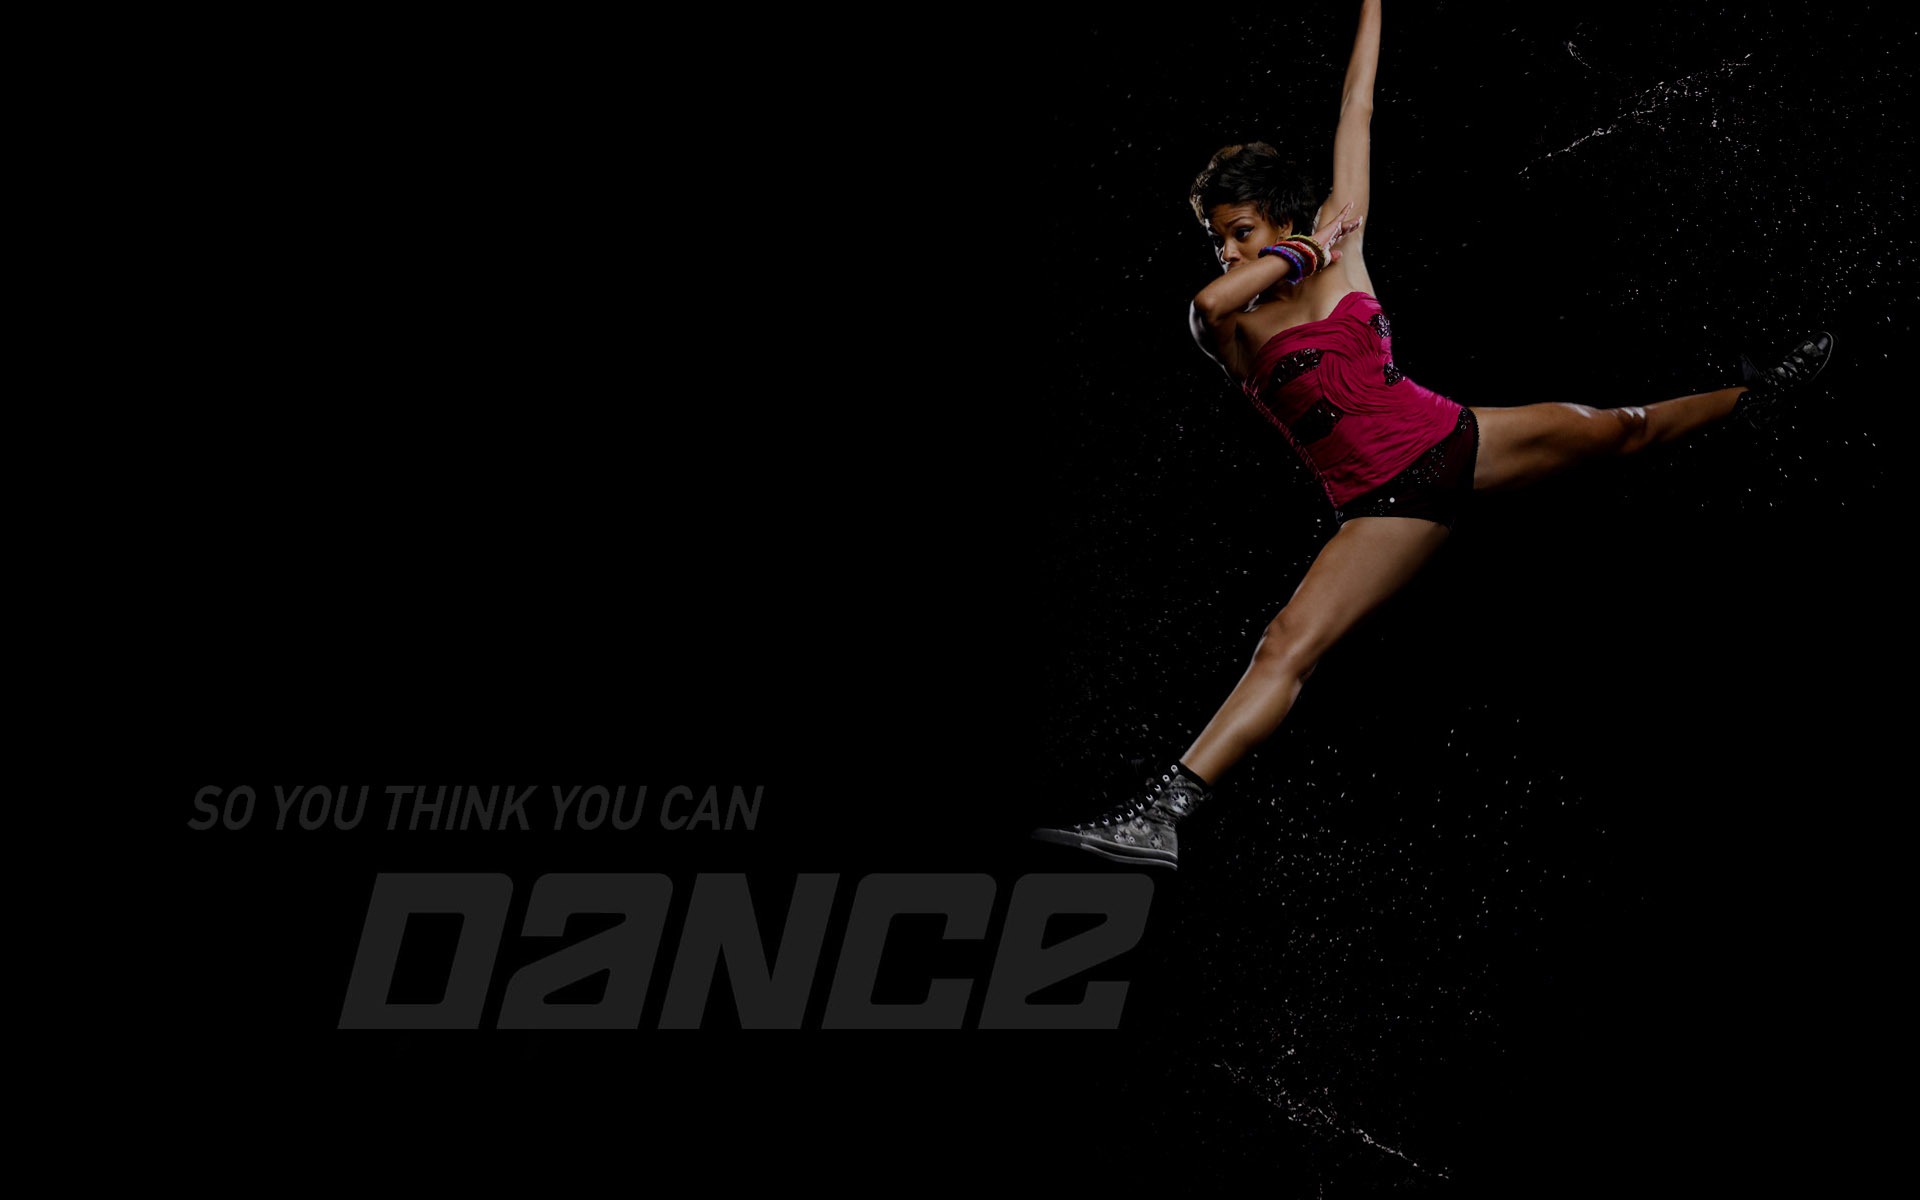 So You Think You Can Dance wallpaper (2) #15 - 1920x1200